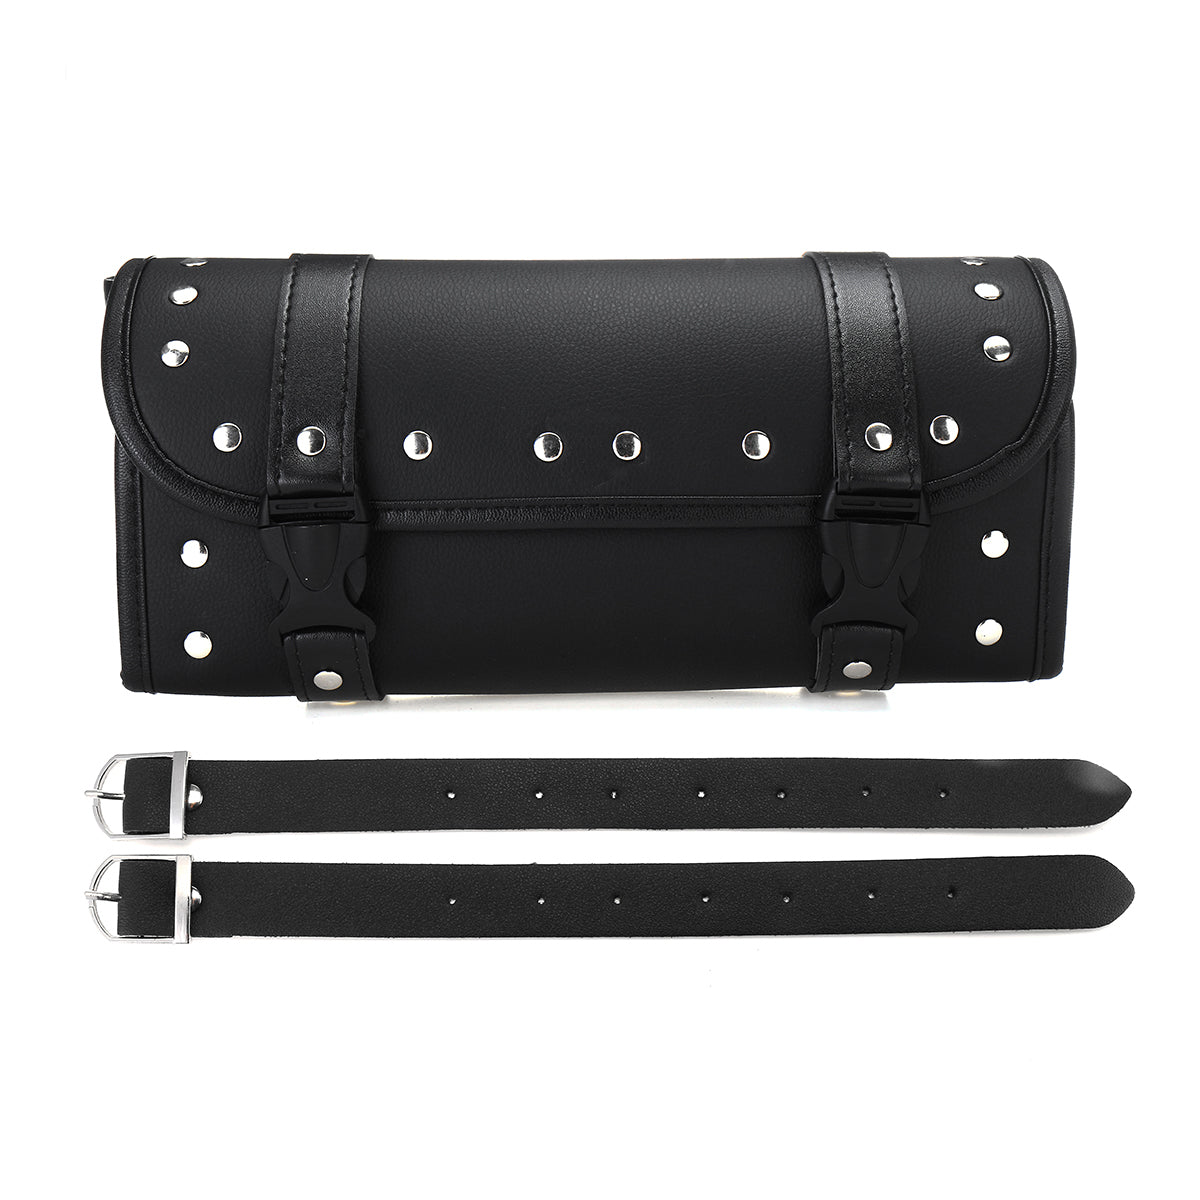 Black Motorcycle Front Fork Tool Bag Pouch Luggage SaddleBag Black Leather Universal For Touring